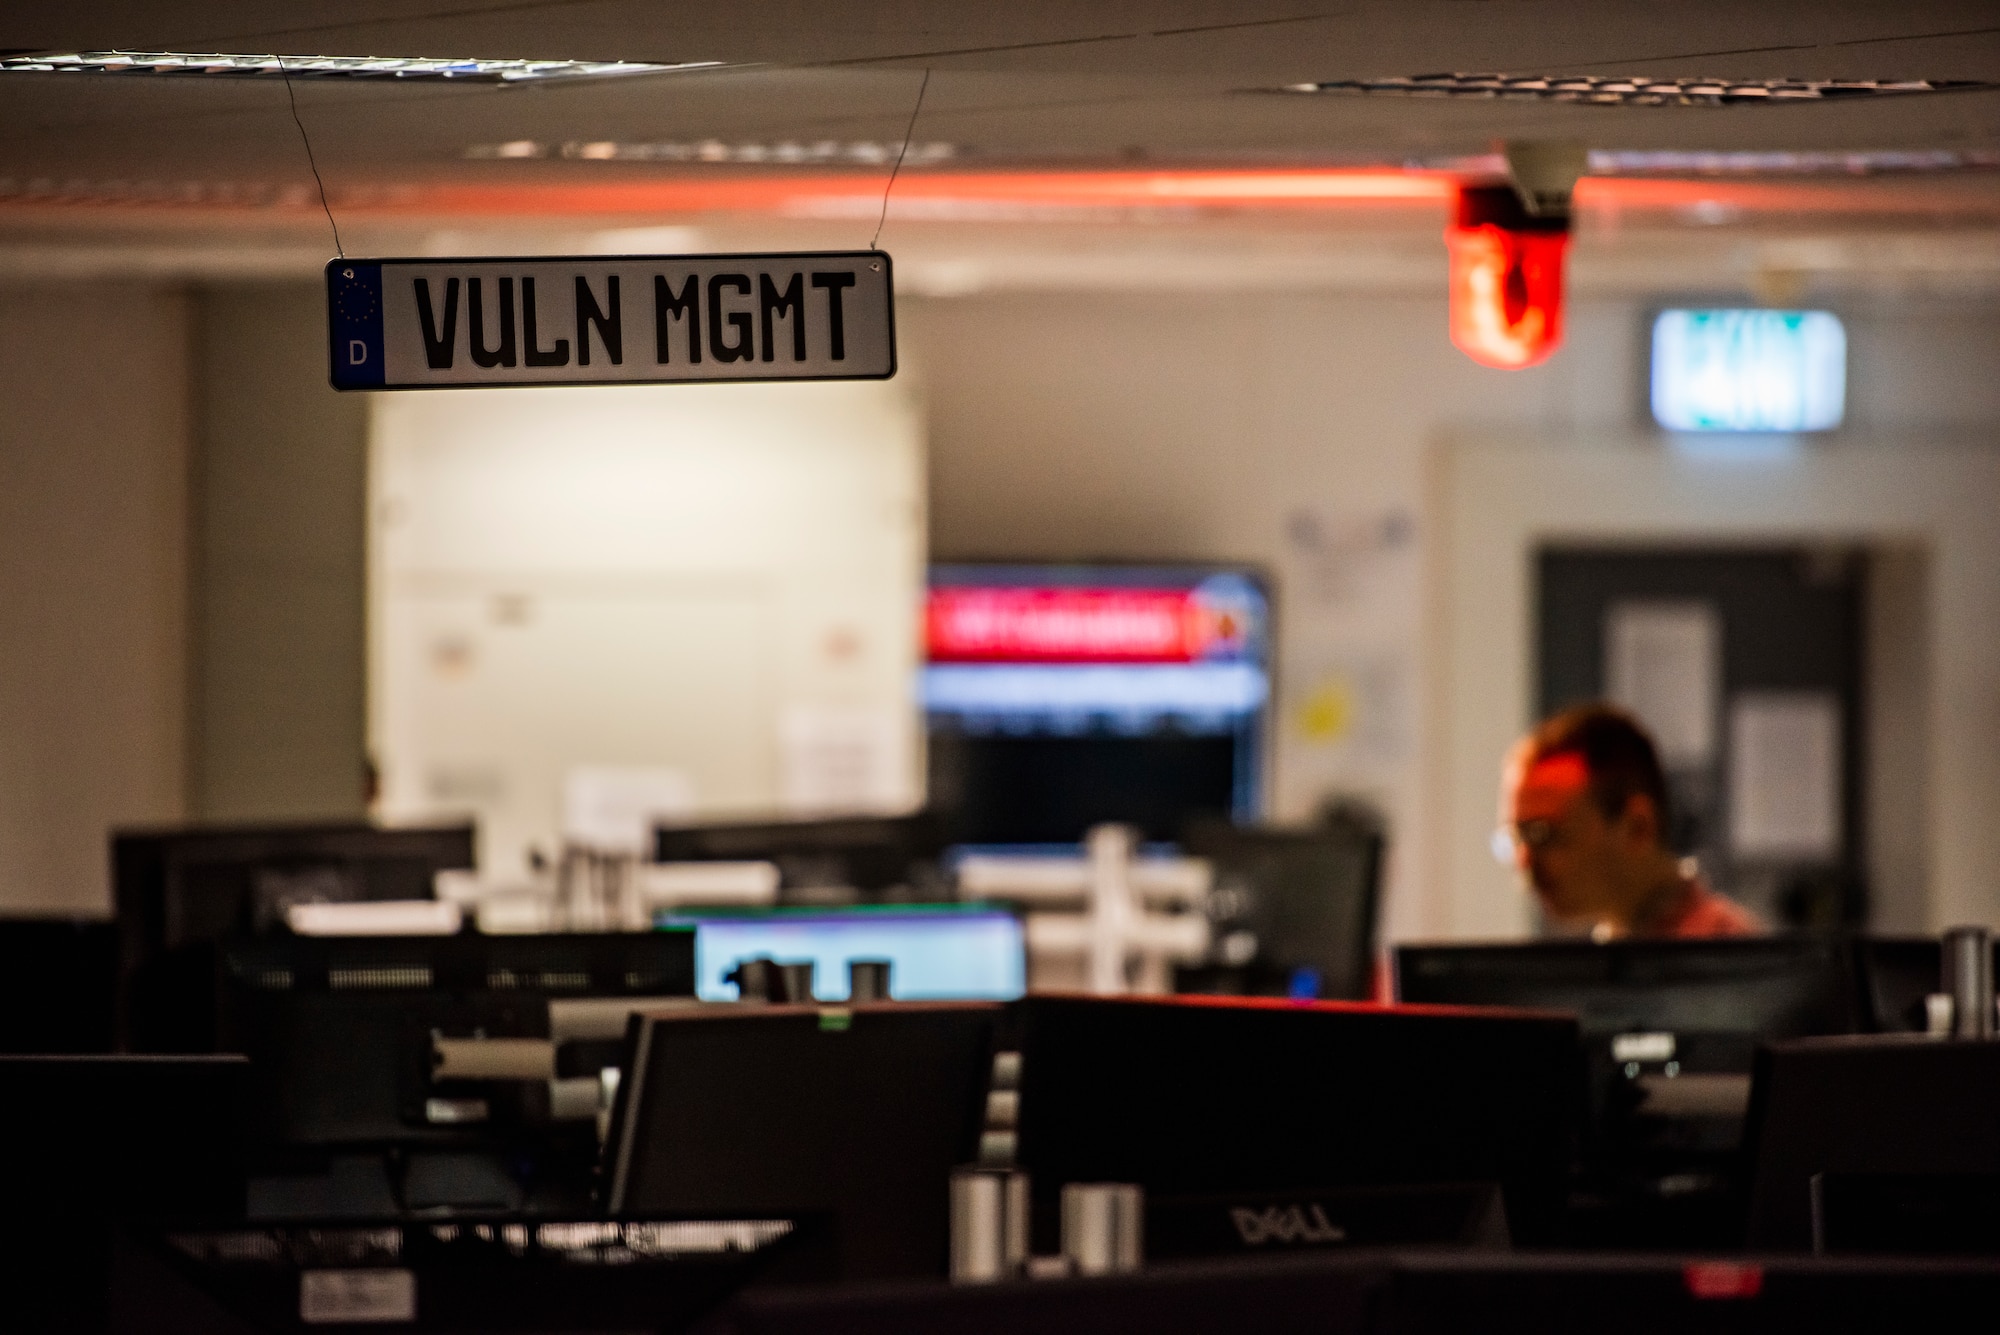 A vulnerability management sign is waning from the ceiling in the middle of a room full of a lot of computers.